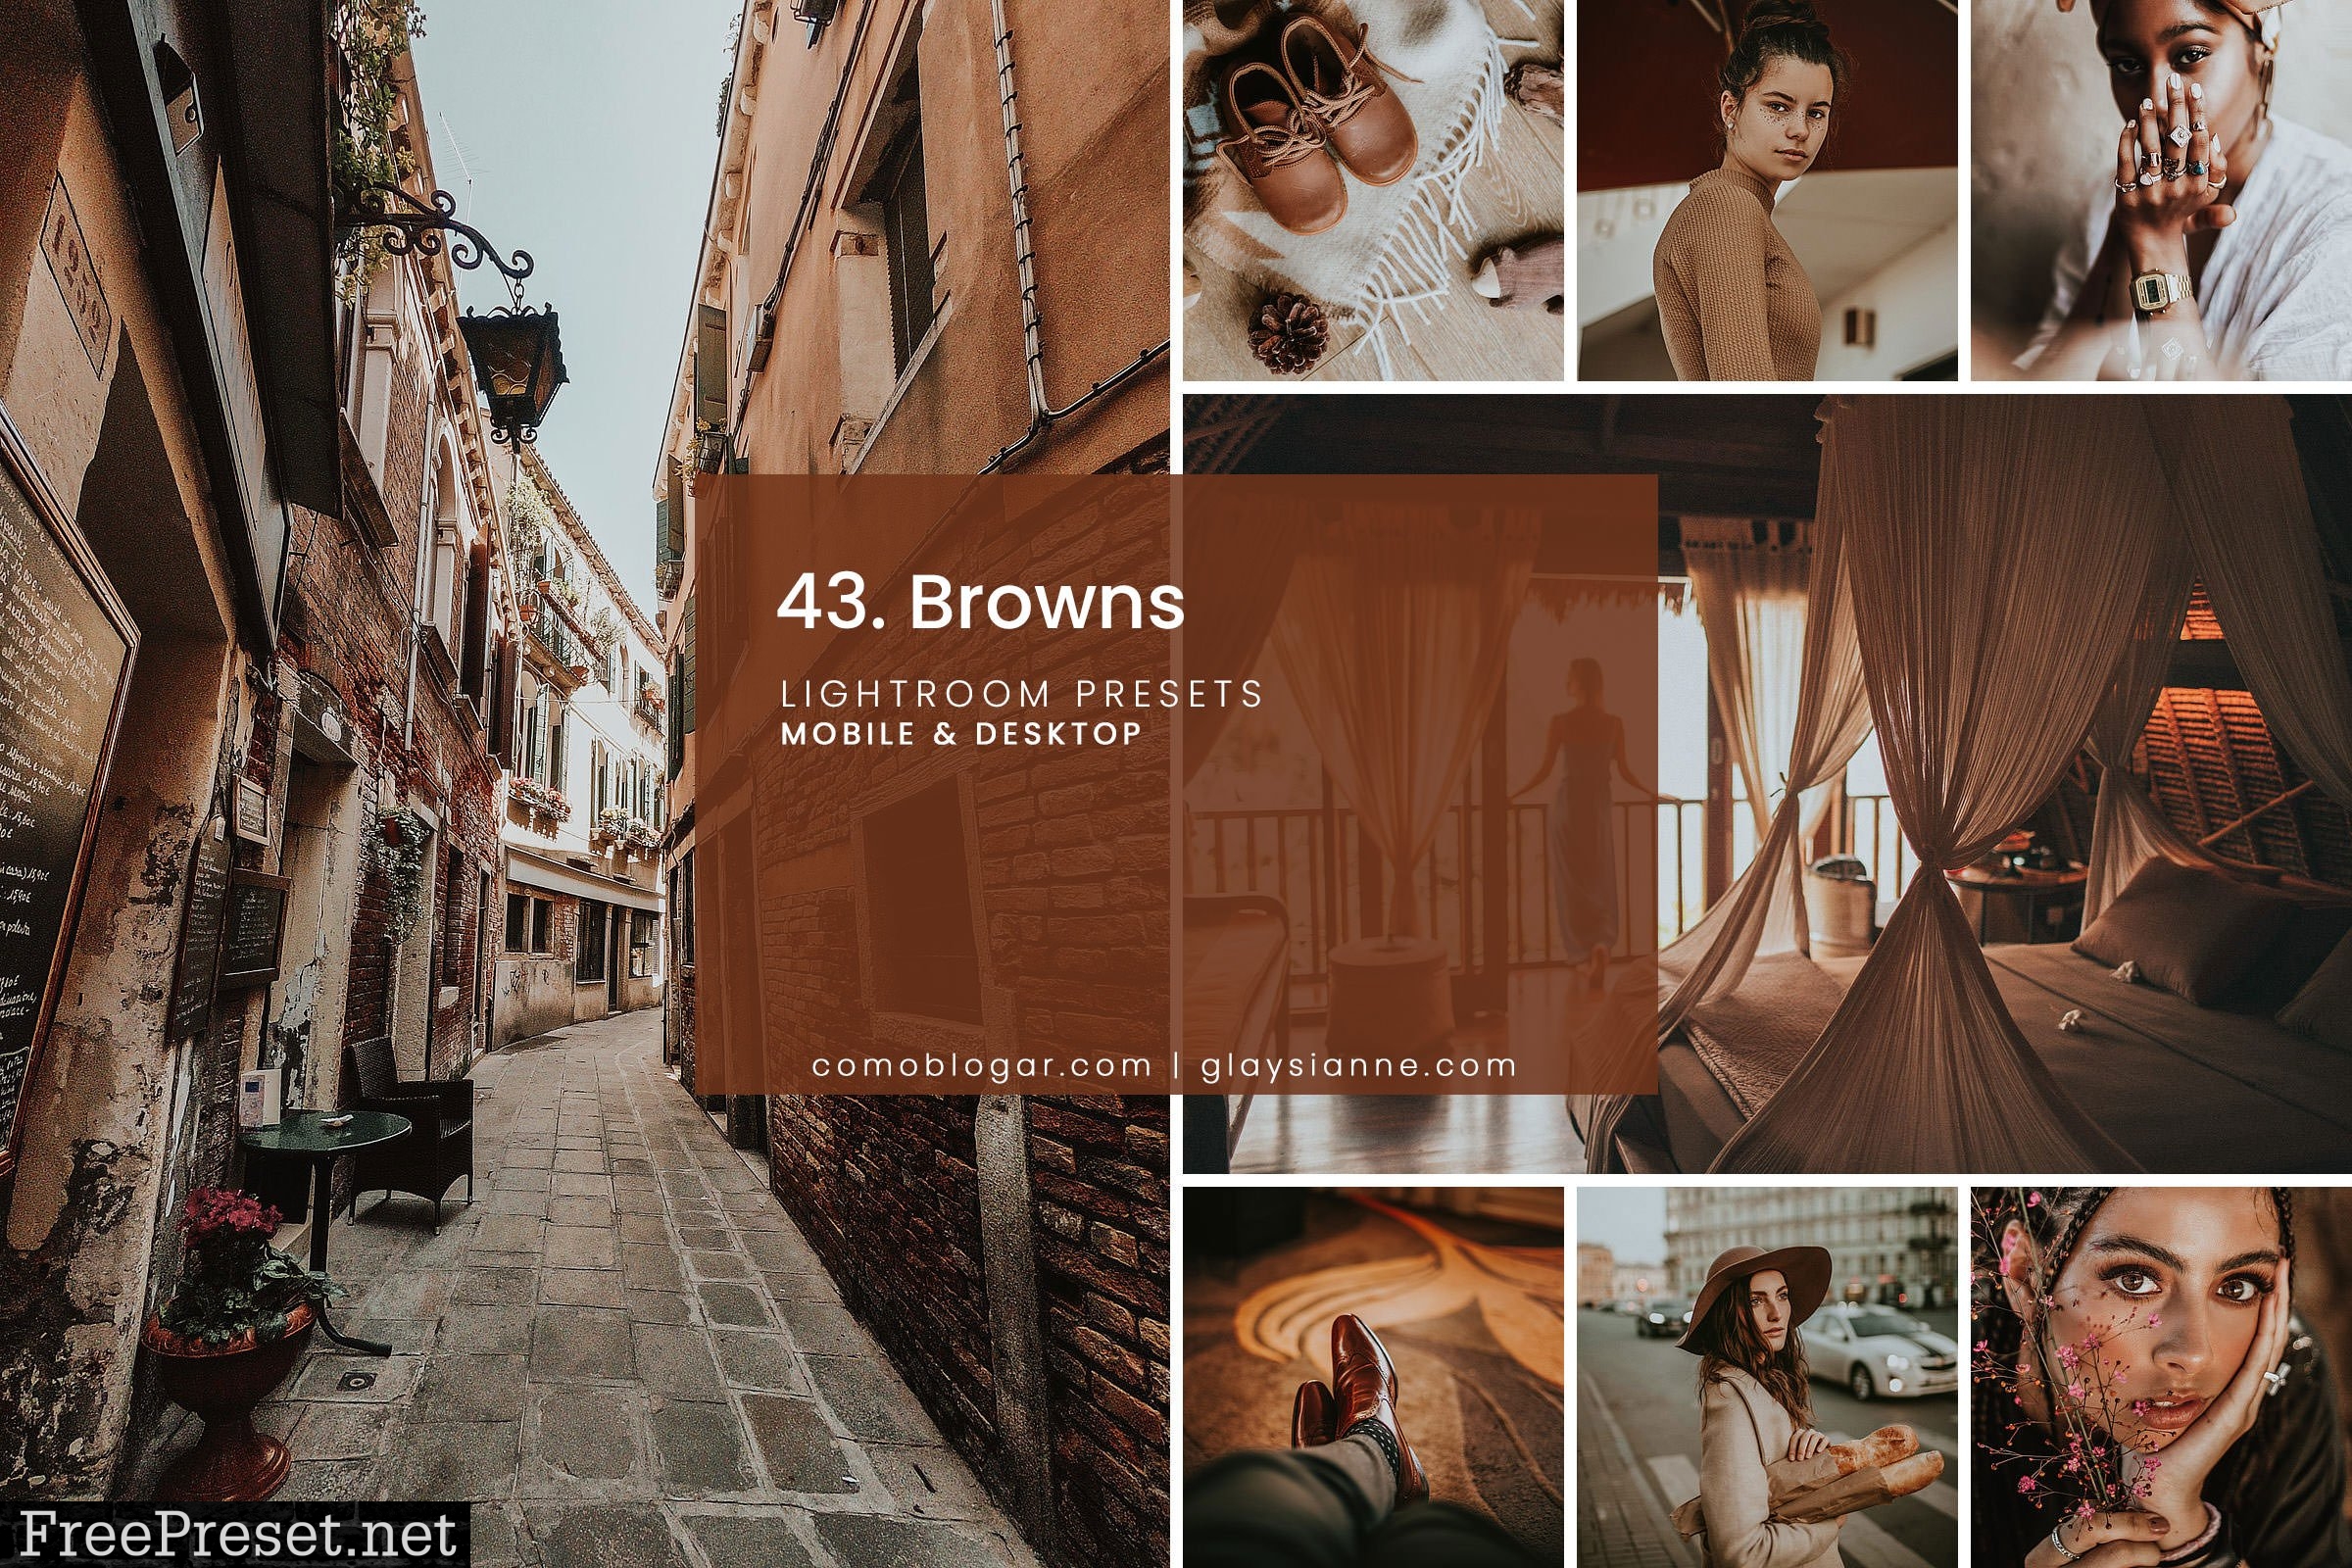 43. Browns